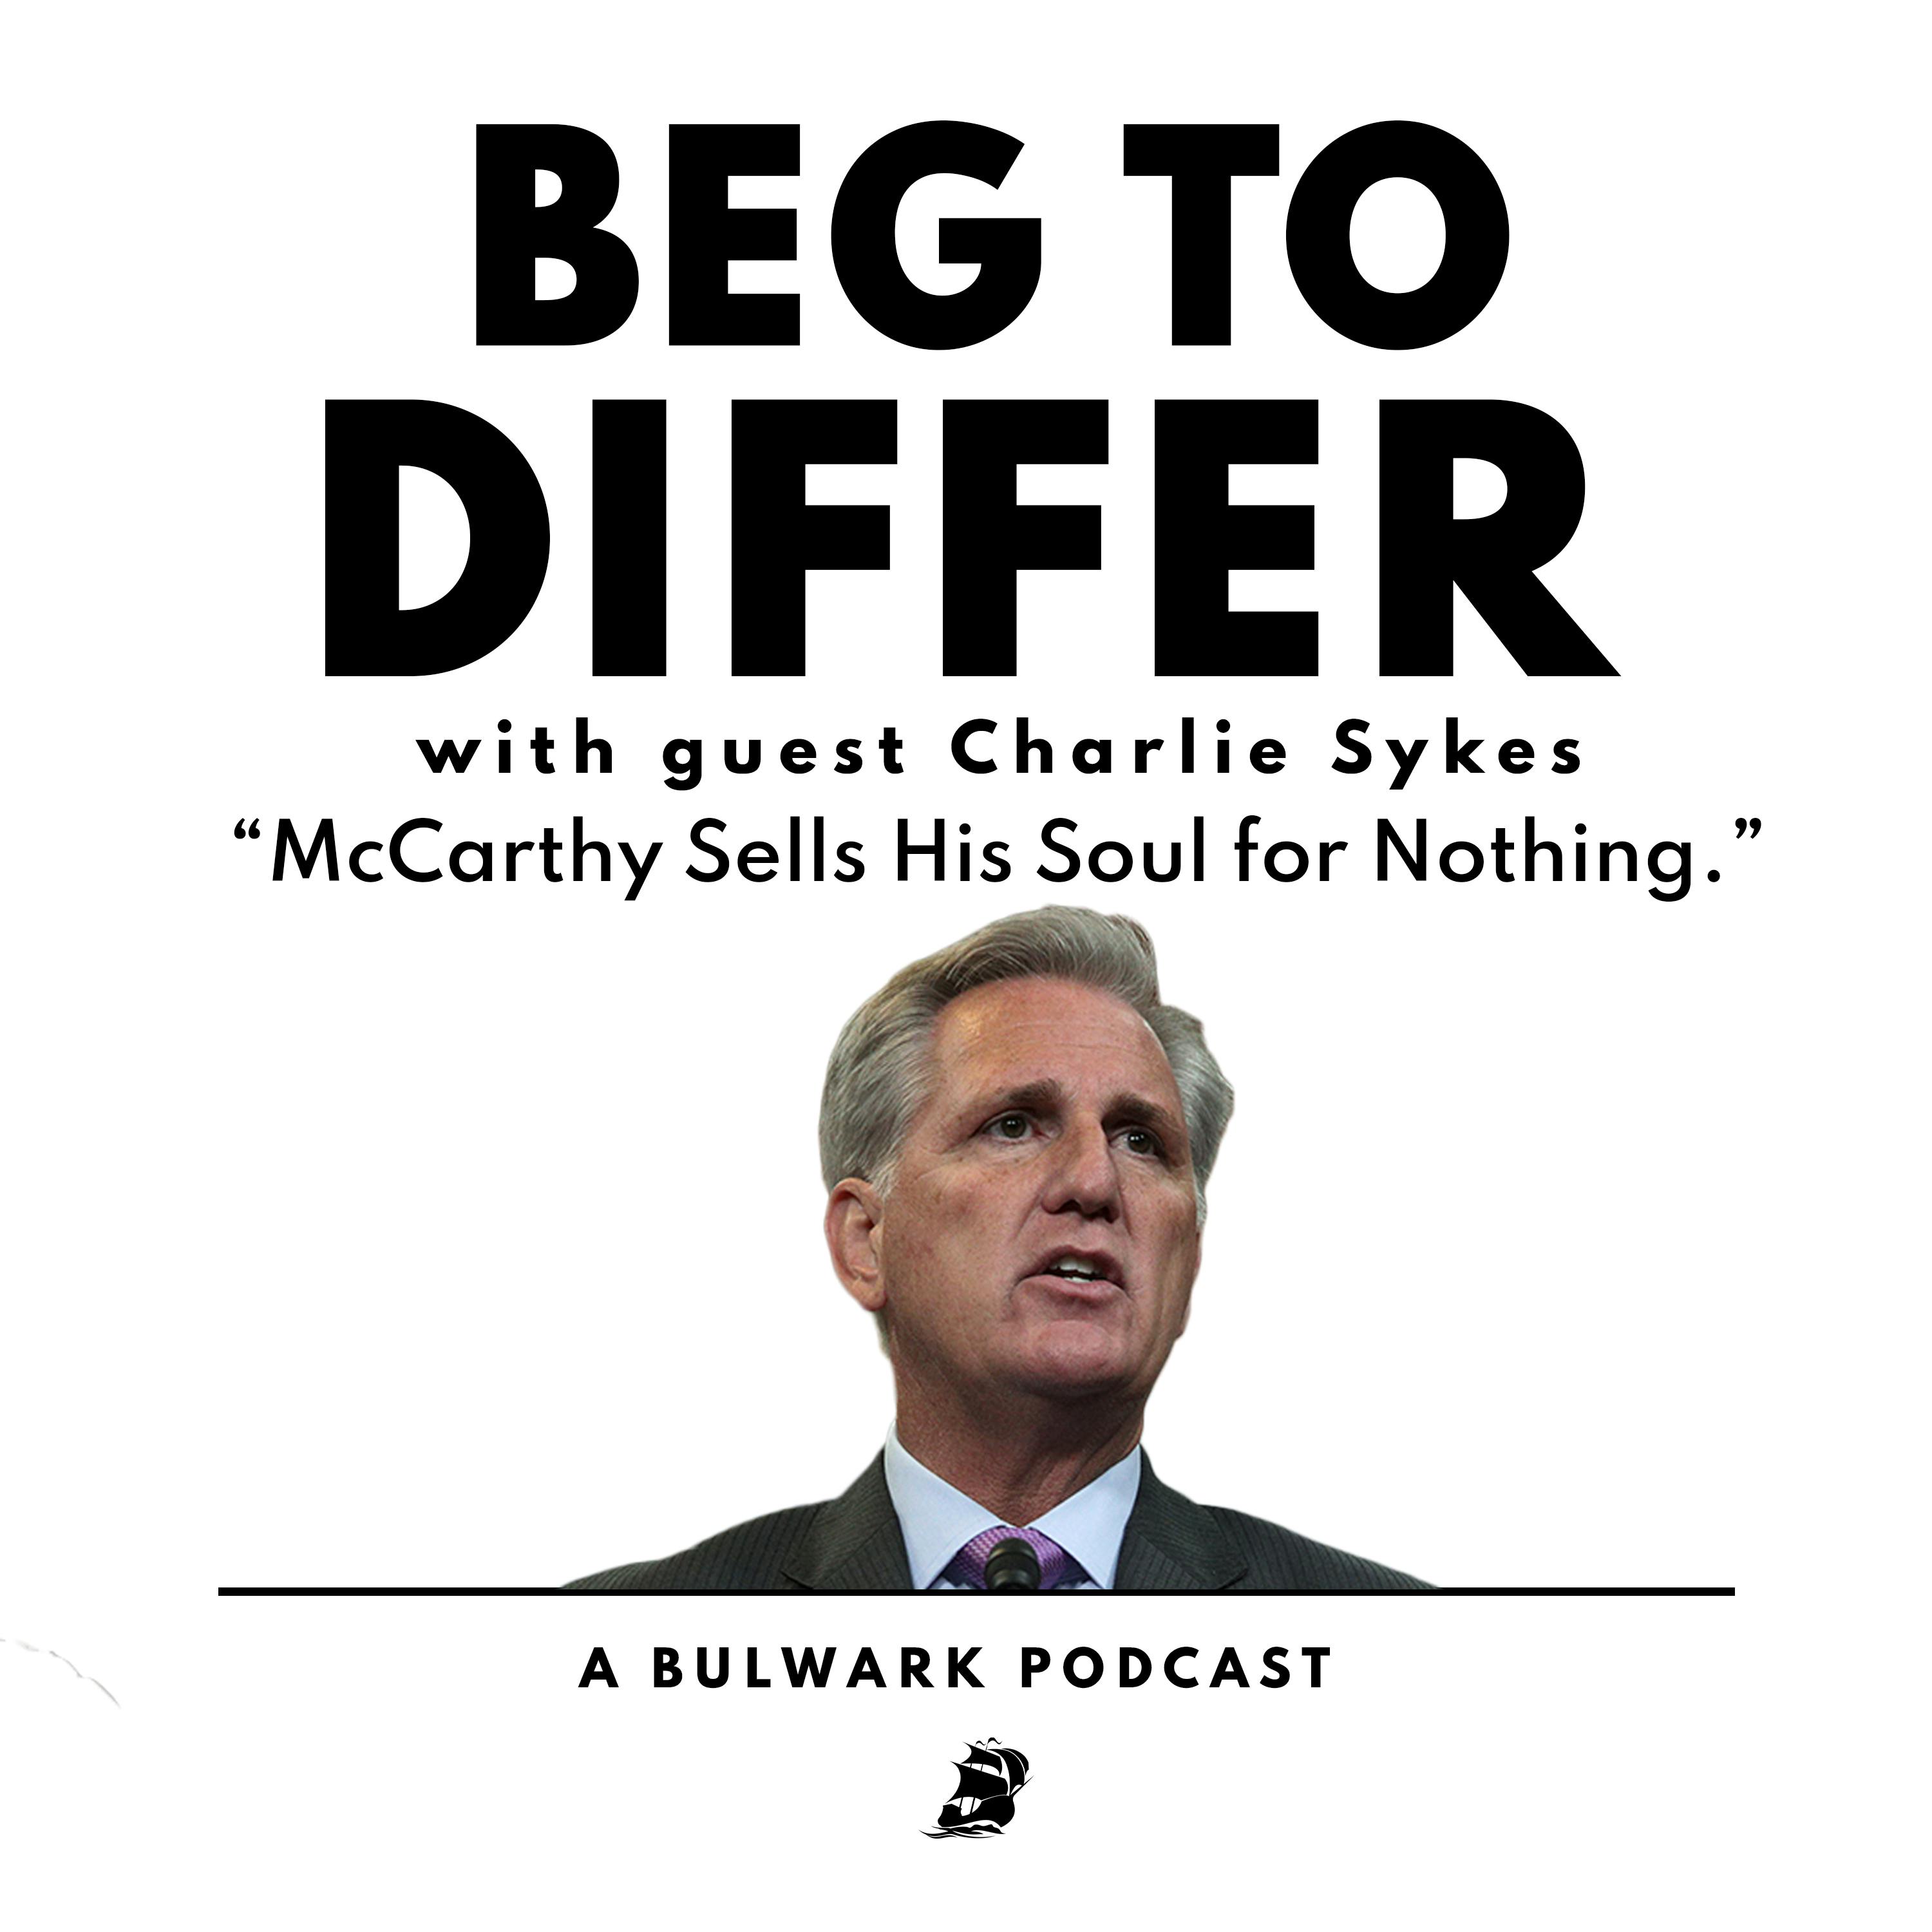 McCarthy Sells His Soul for Nothing